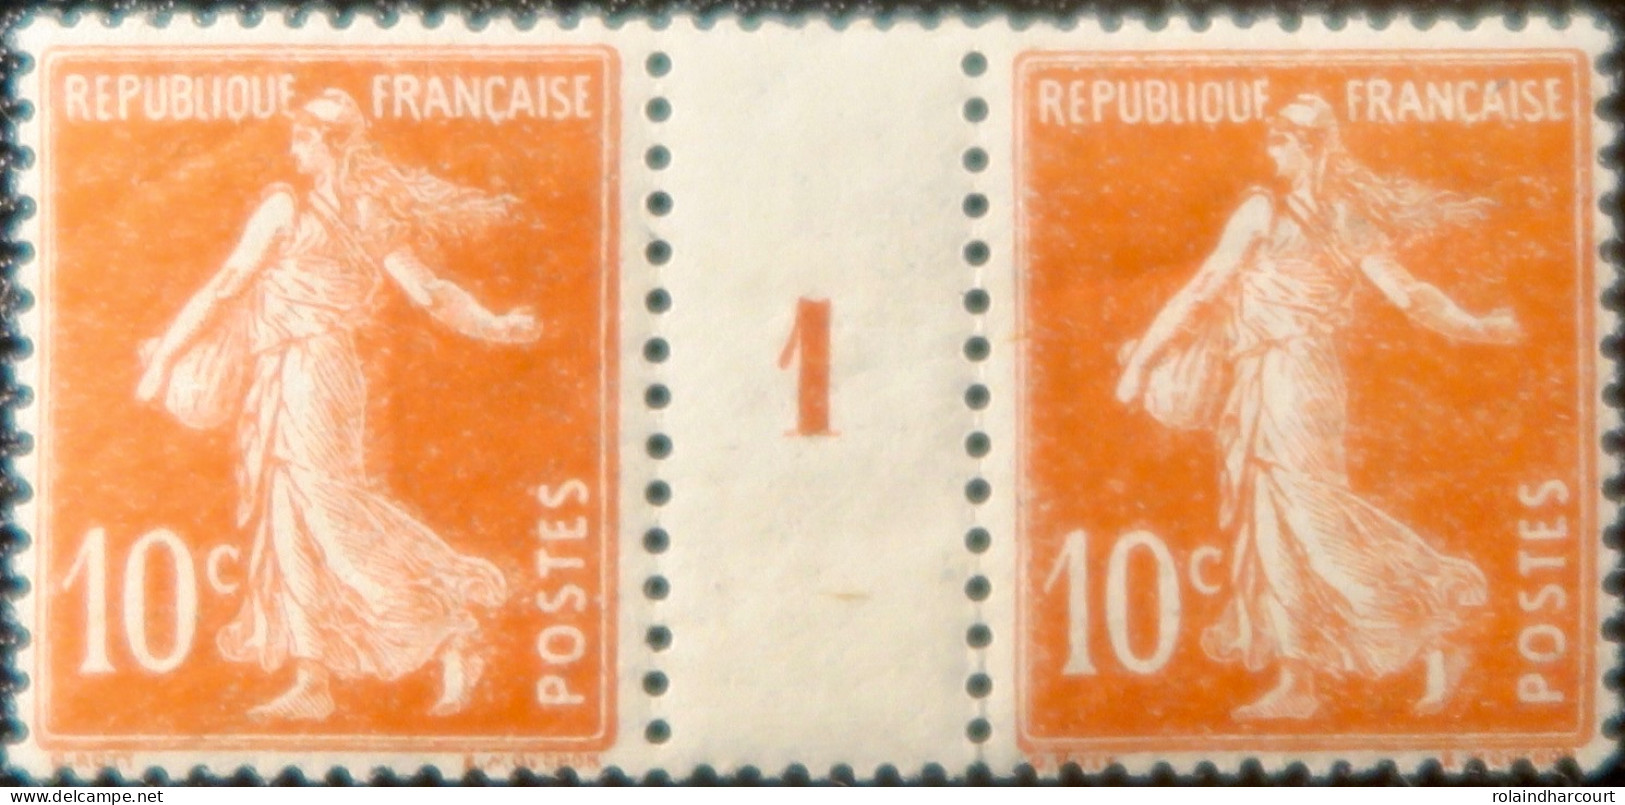 LP2943/58 - FRANCE - 1921 - TYPE SEMEUSE CAMEE - N°138 (millésime 1) TIMBRES NEUFS** - Millesimes